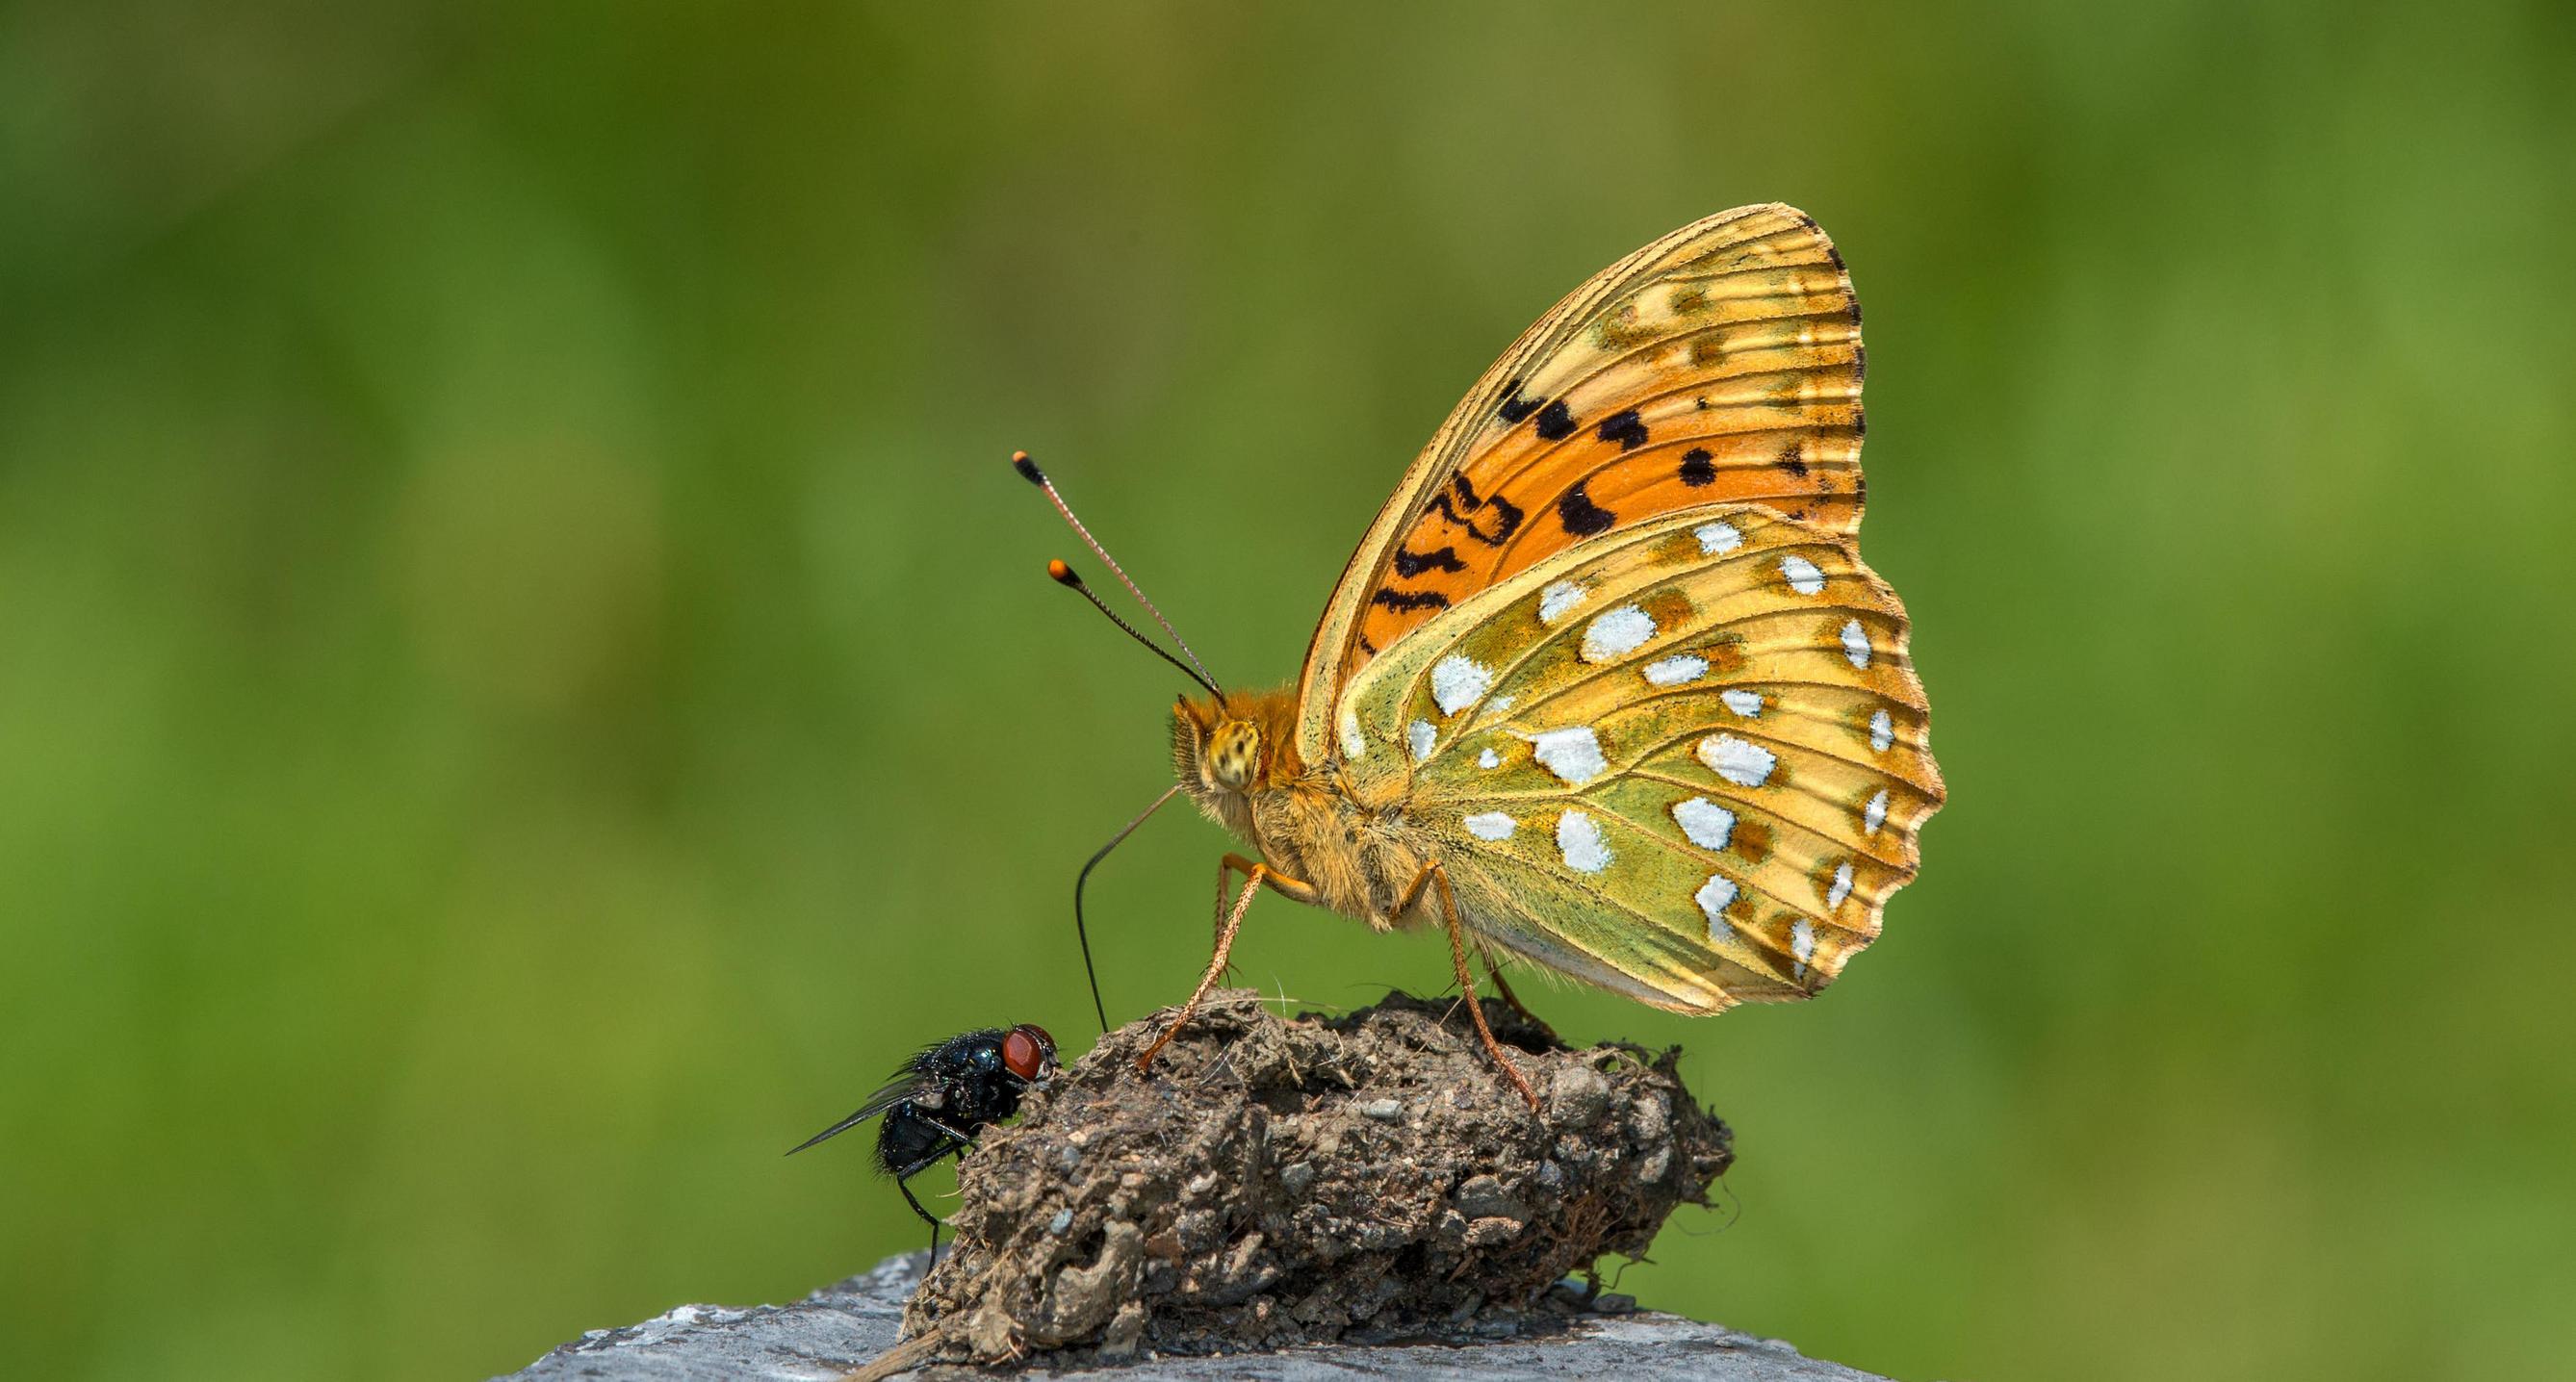 Image from Yealand Kalfayan Butterfly Photography